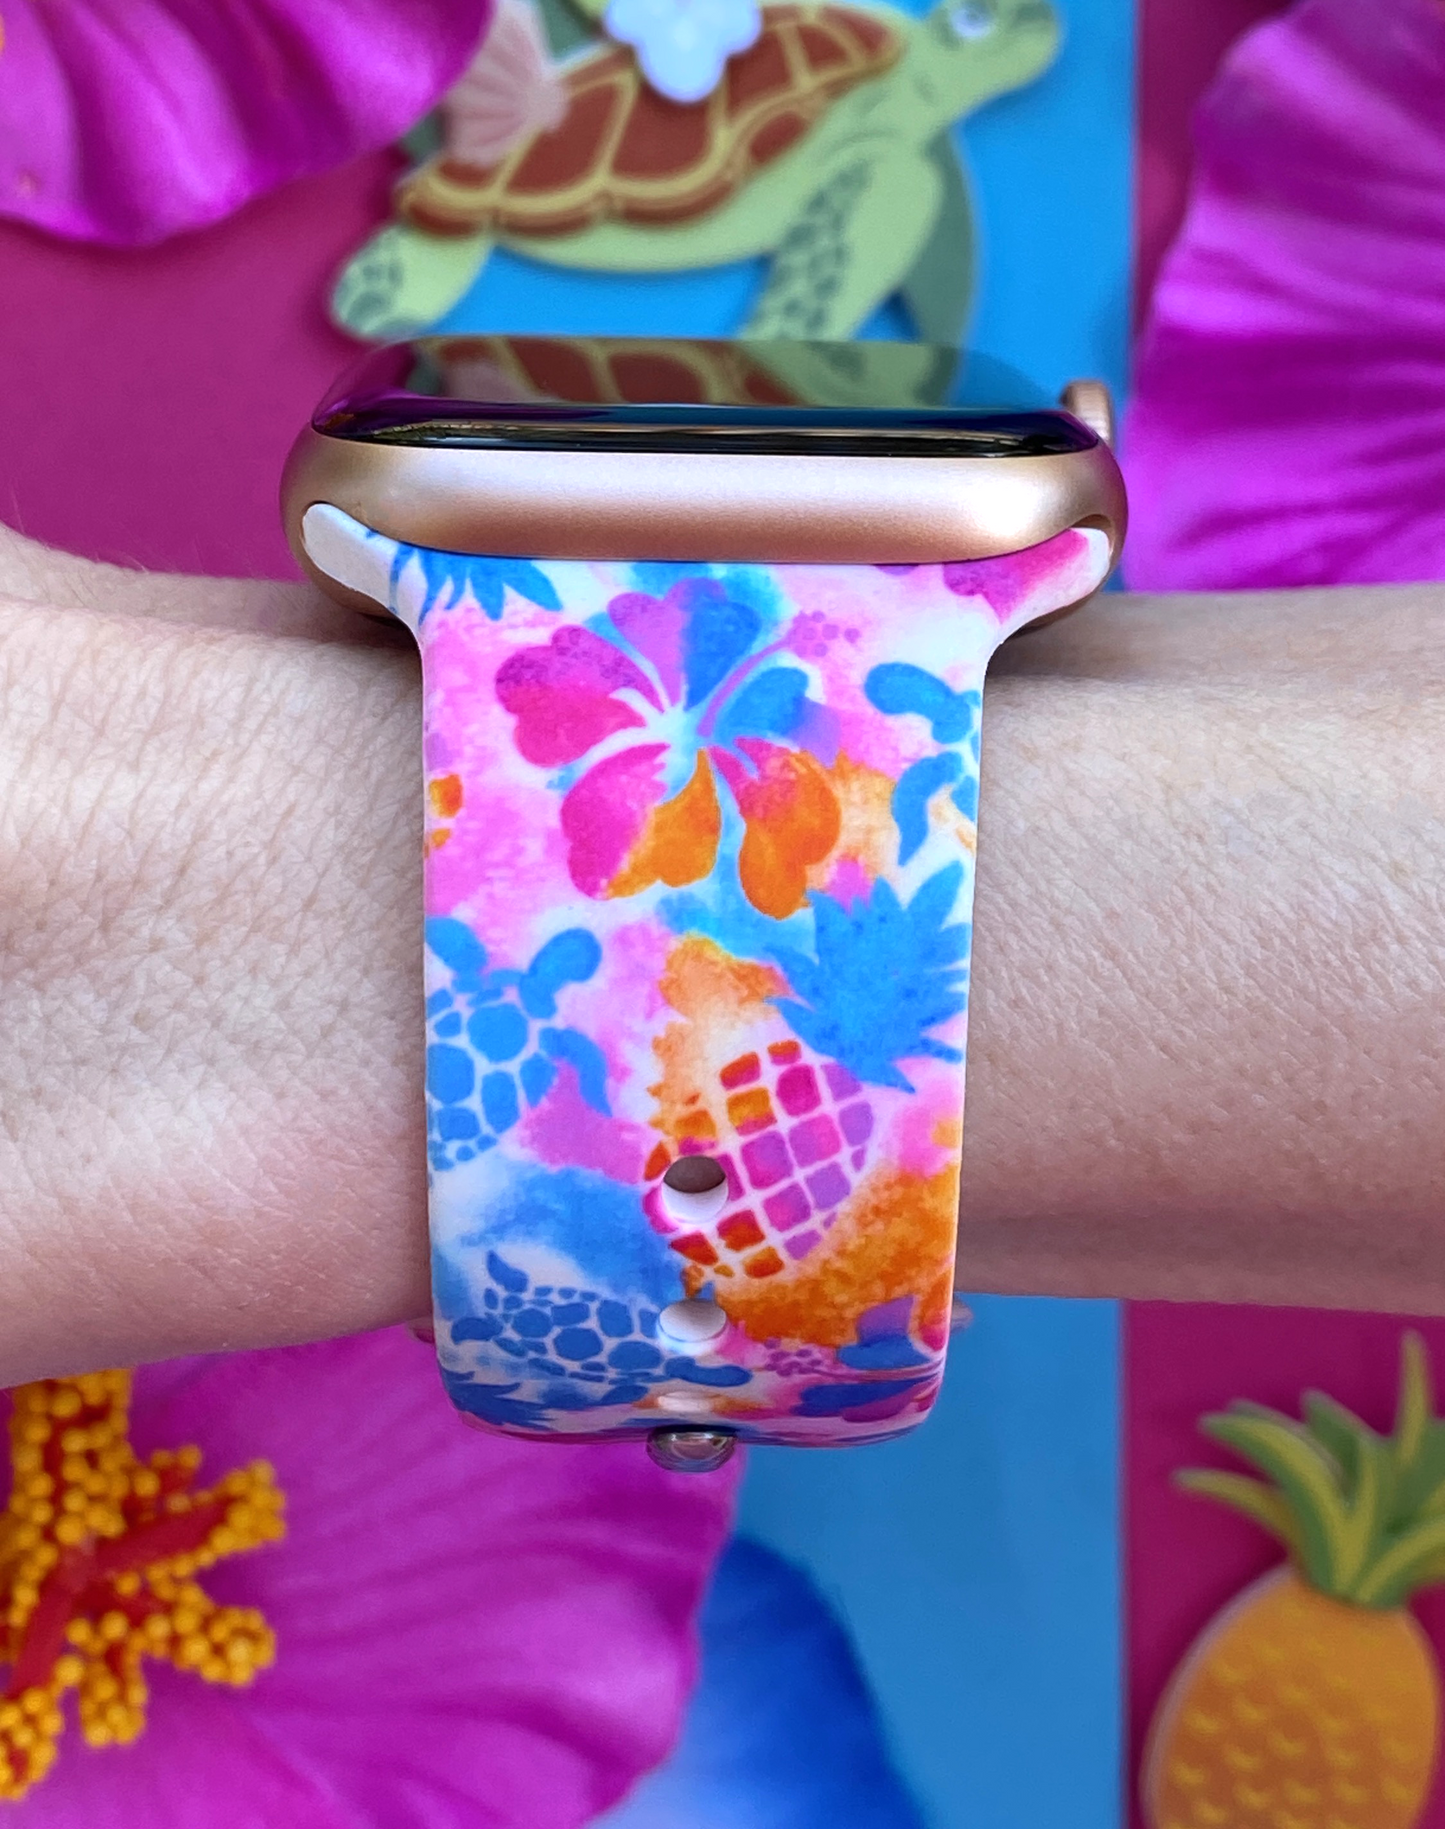 Tropical Turtles Apple Watch Band